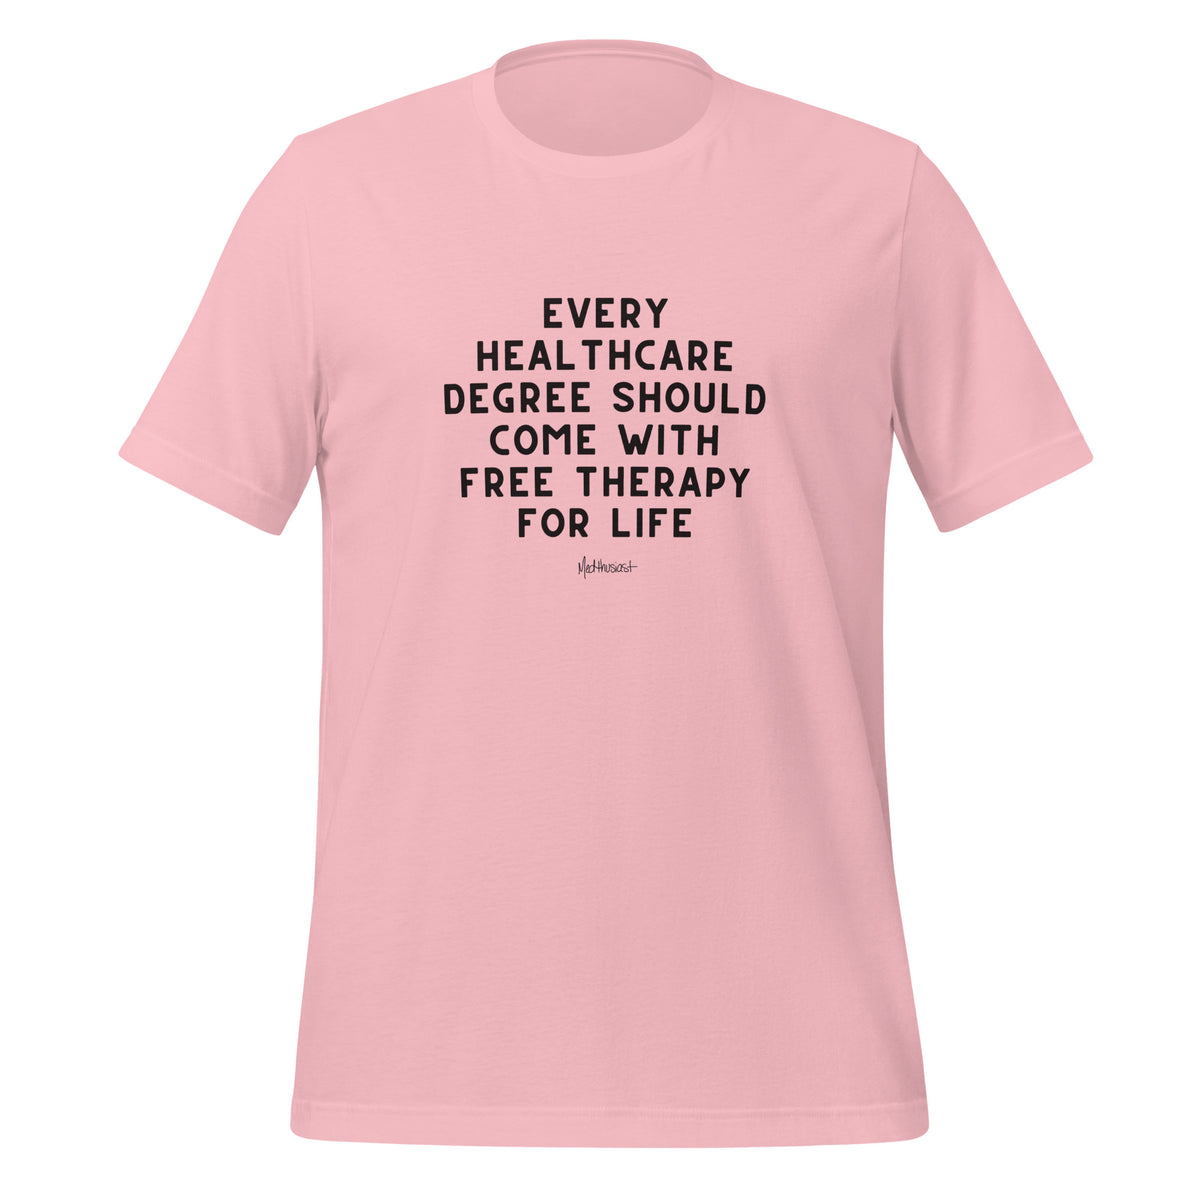 FREE THERAPY FOR LIFE TEE